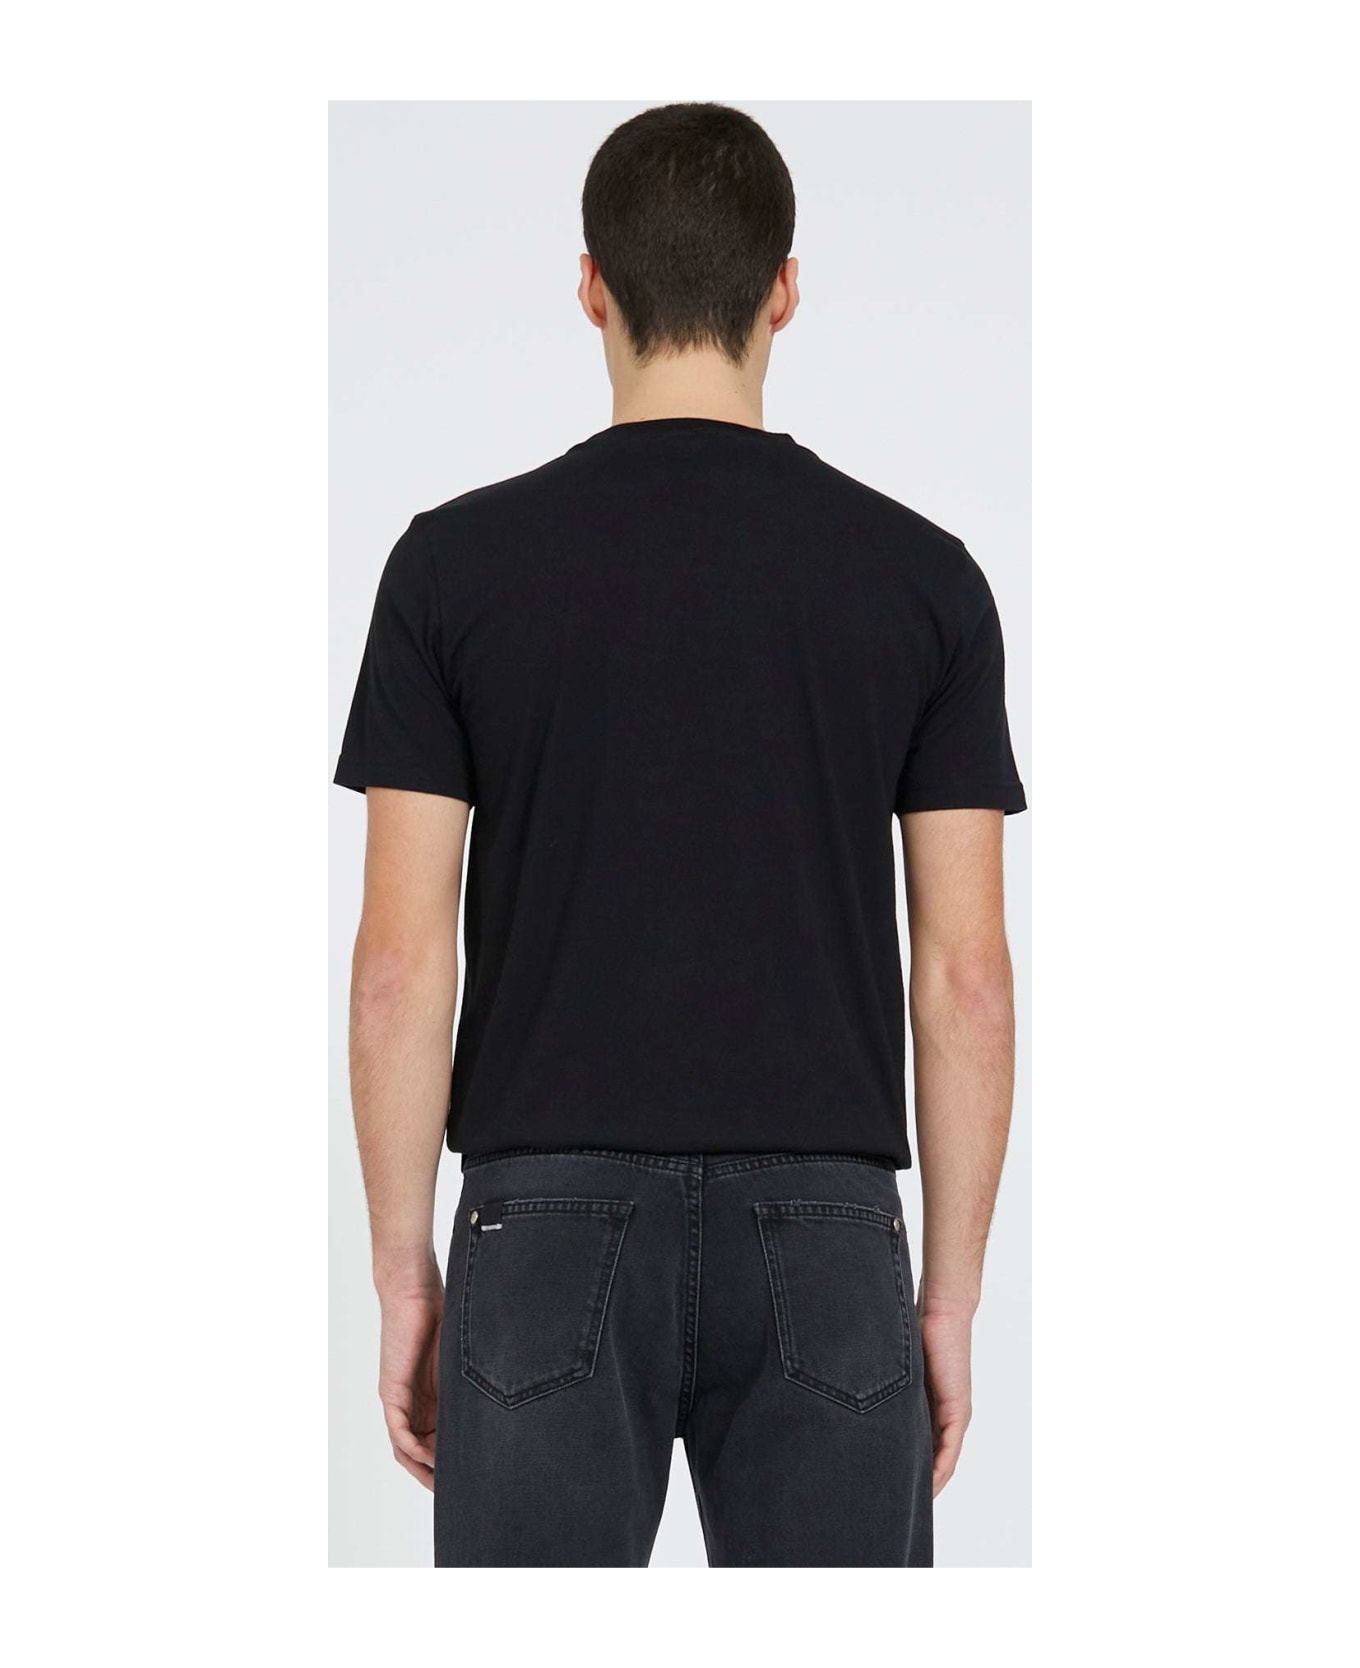 John Richmond T-shirt With Decorative Studs On The Front - Nero シャツ